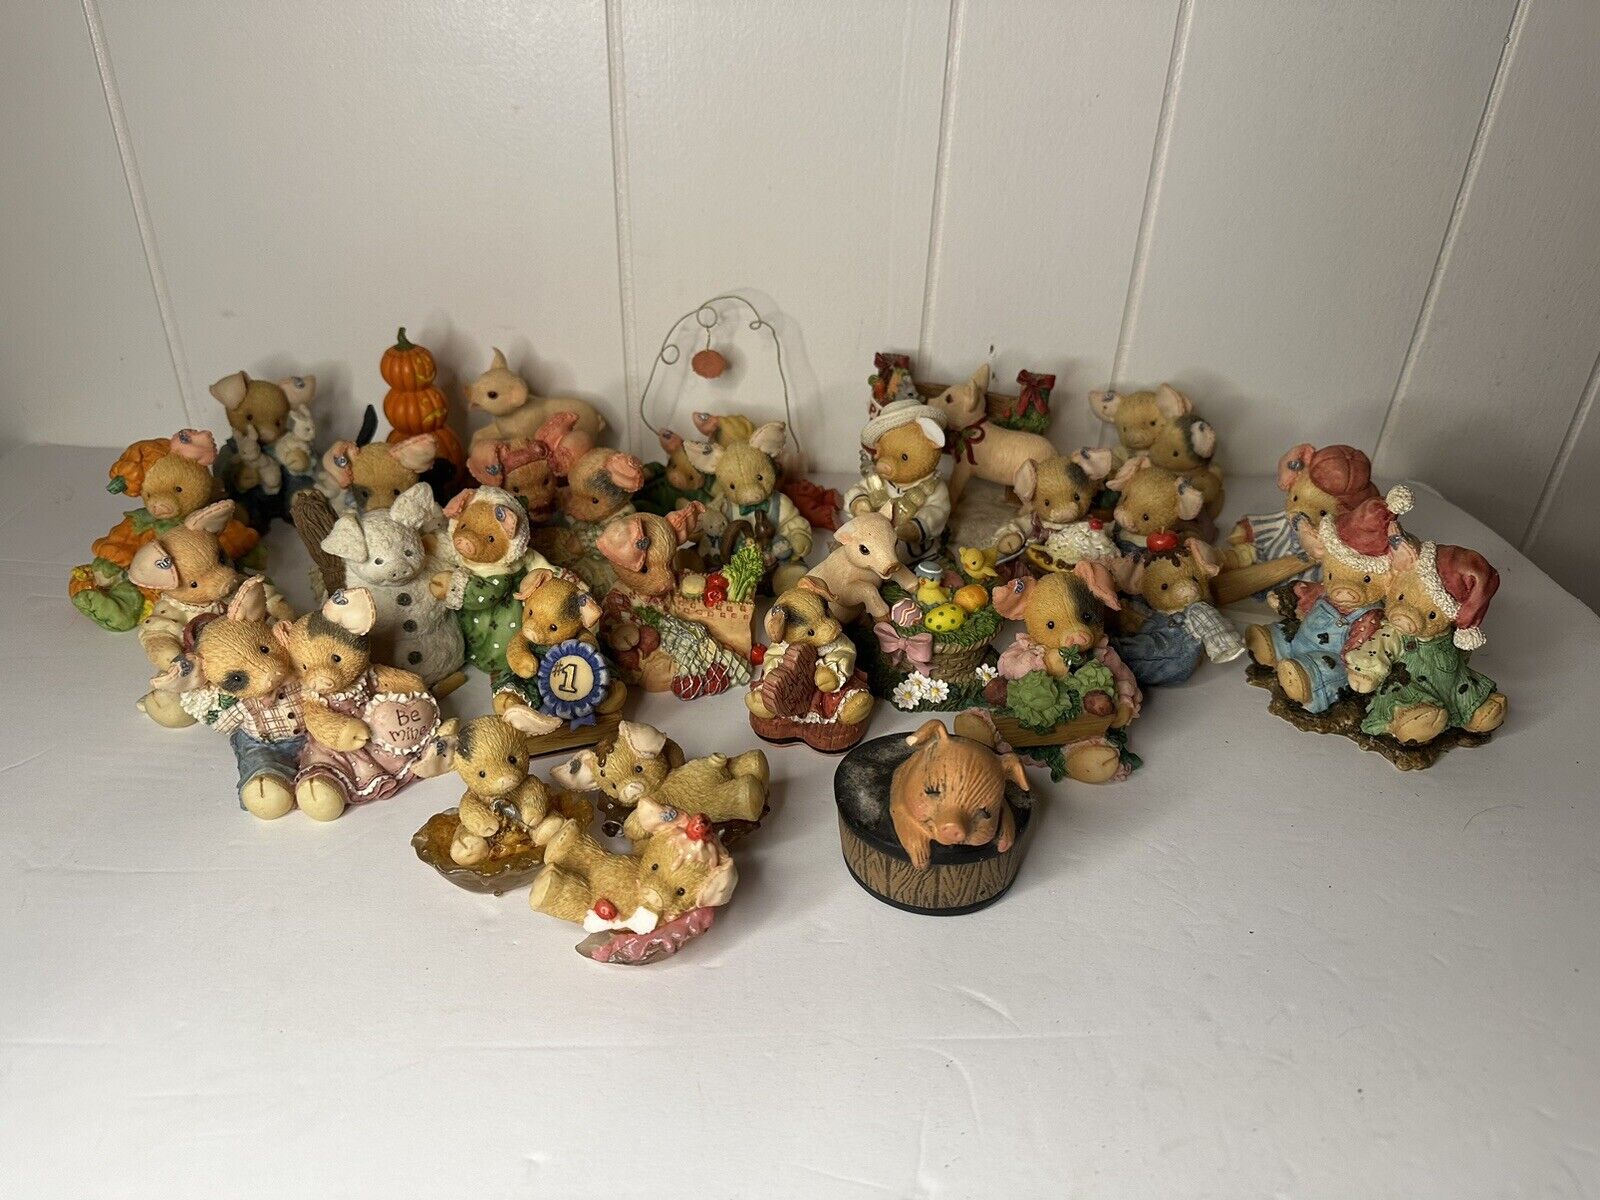 Enesco This Little Piggy Figurine Collection Sow Are Things With You-26 Figures